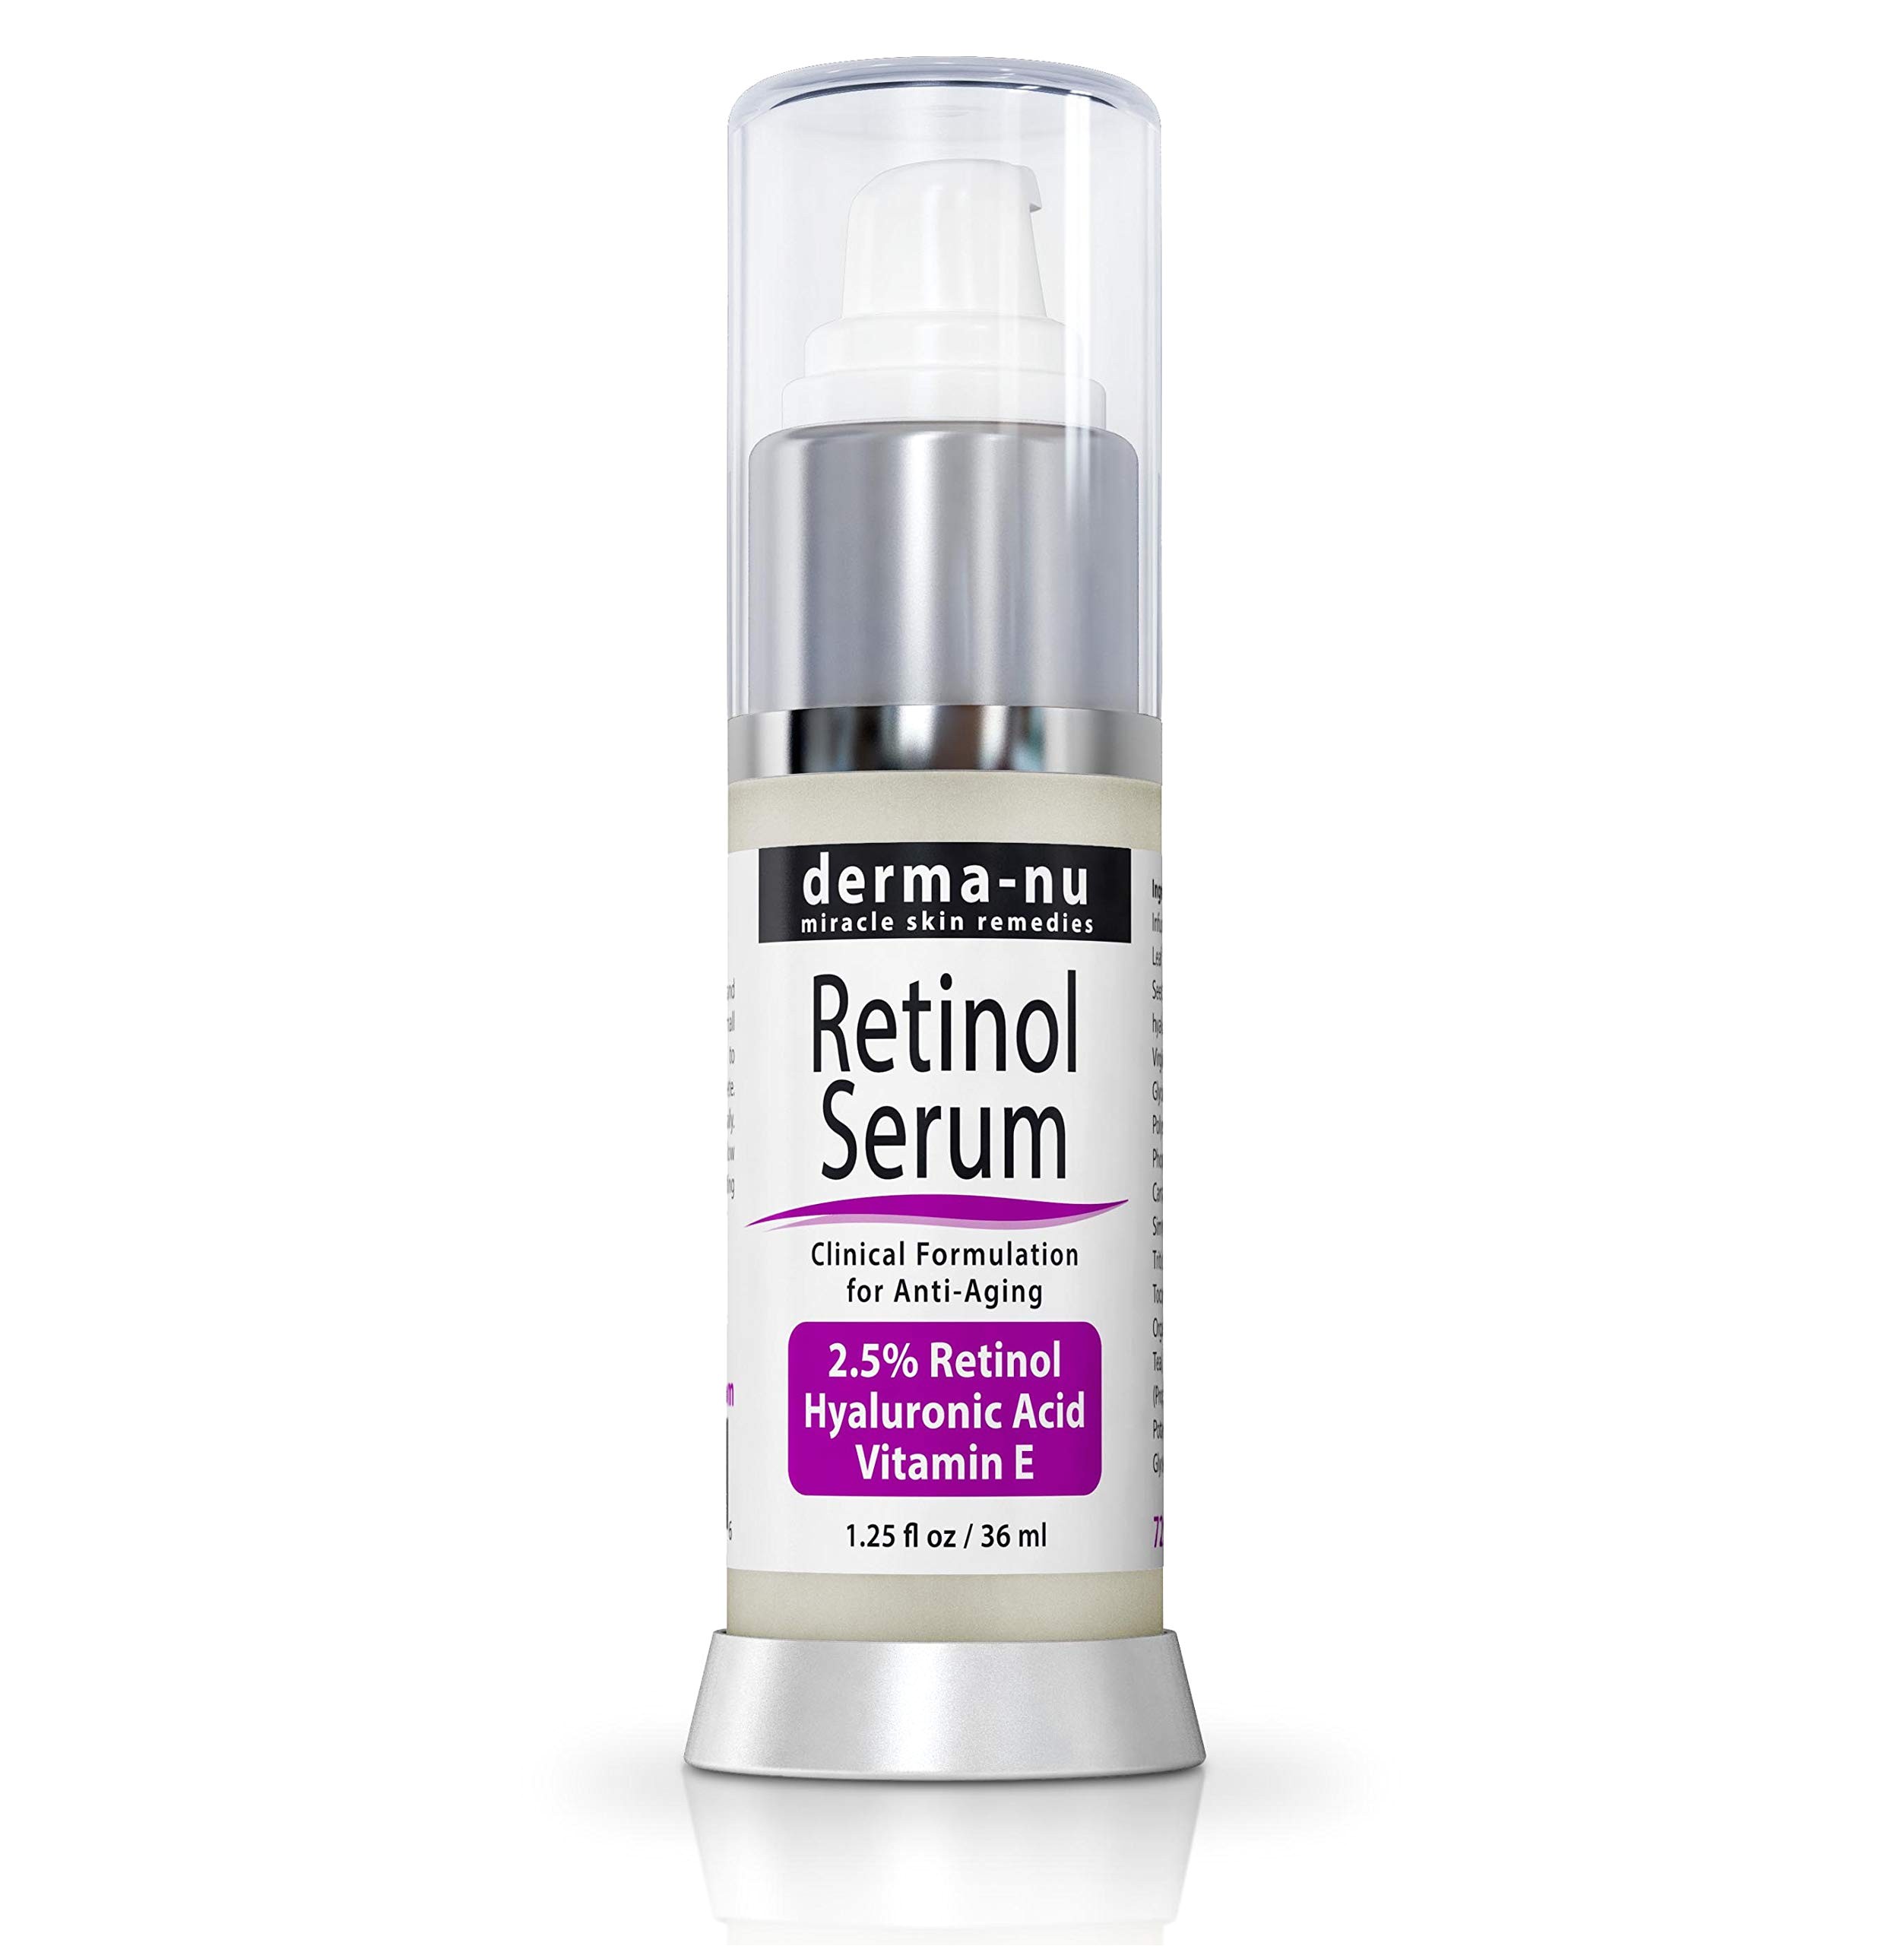 anti aging retinol serum for face hyaluronic acid and vitamin e reduces fine